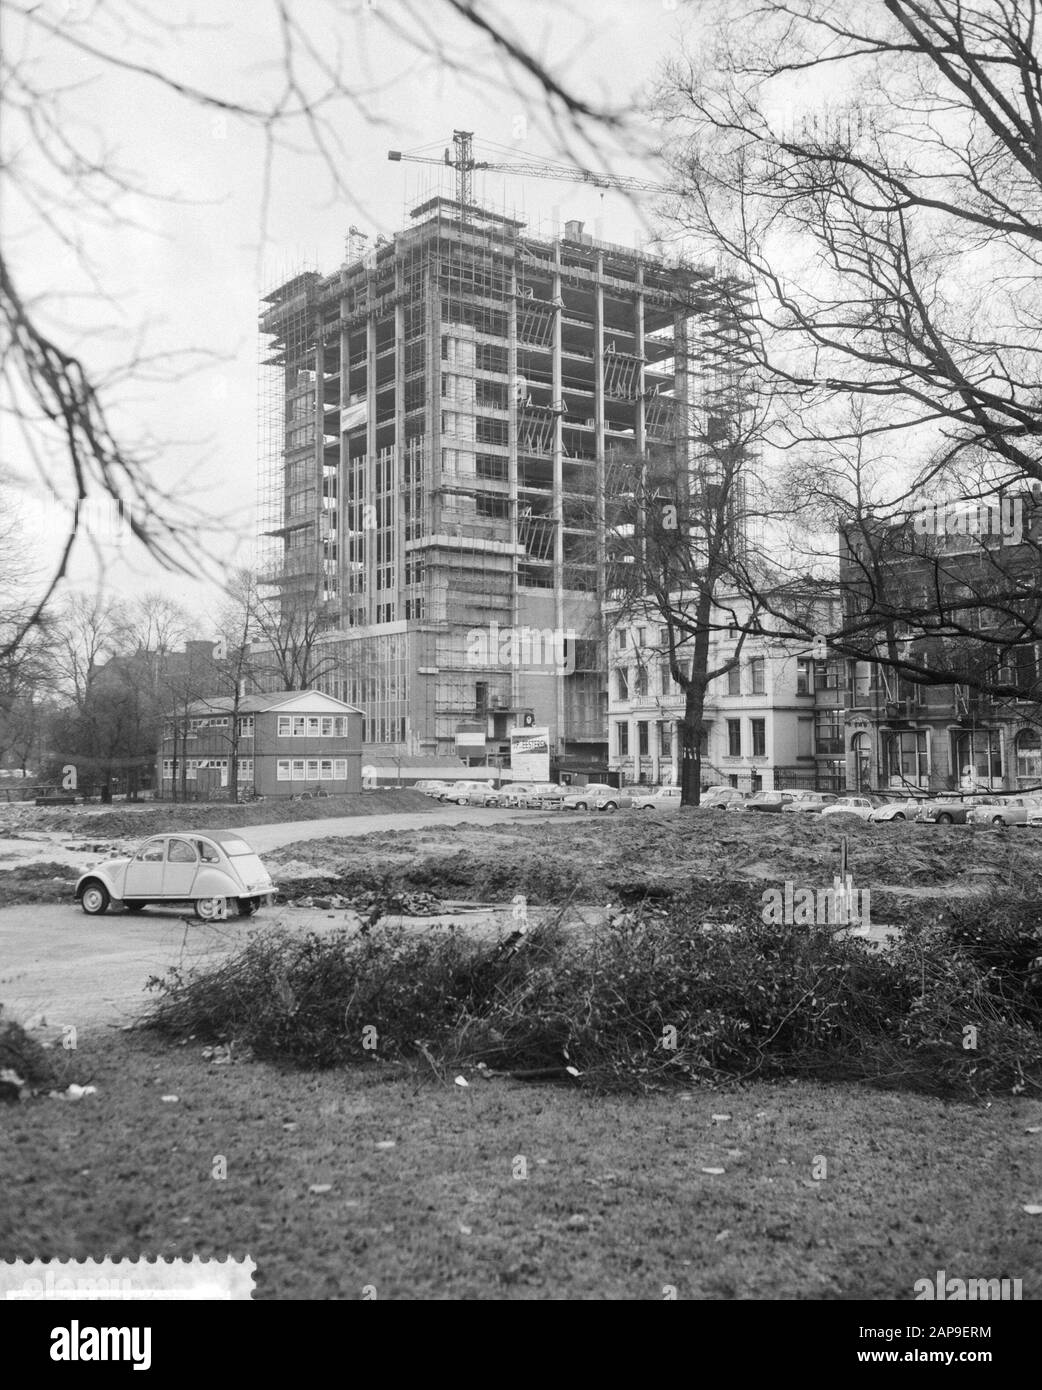 Construction new headquarters of Phs. van Ommeren at the Westerlaan Date: 31 January 1961 Keywords: construction, head offices Personal name: Phs. van Ommeren Stock Photo